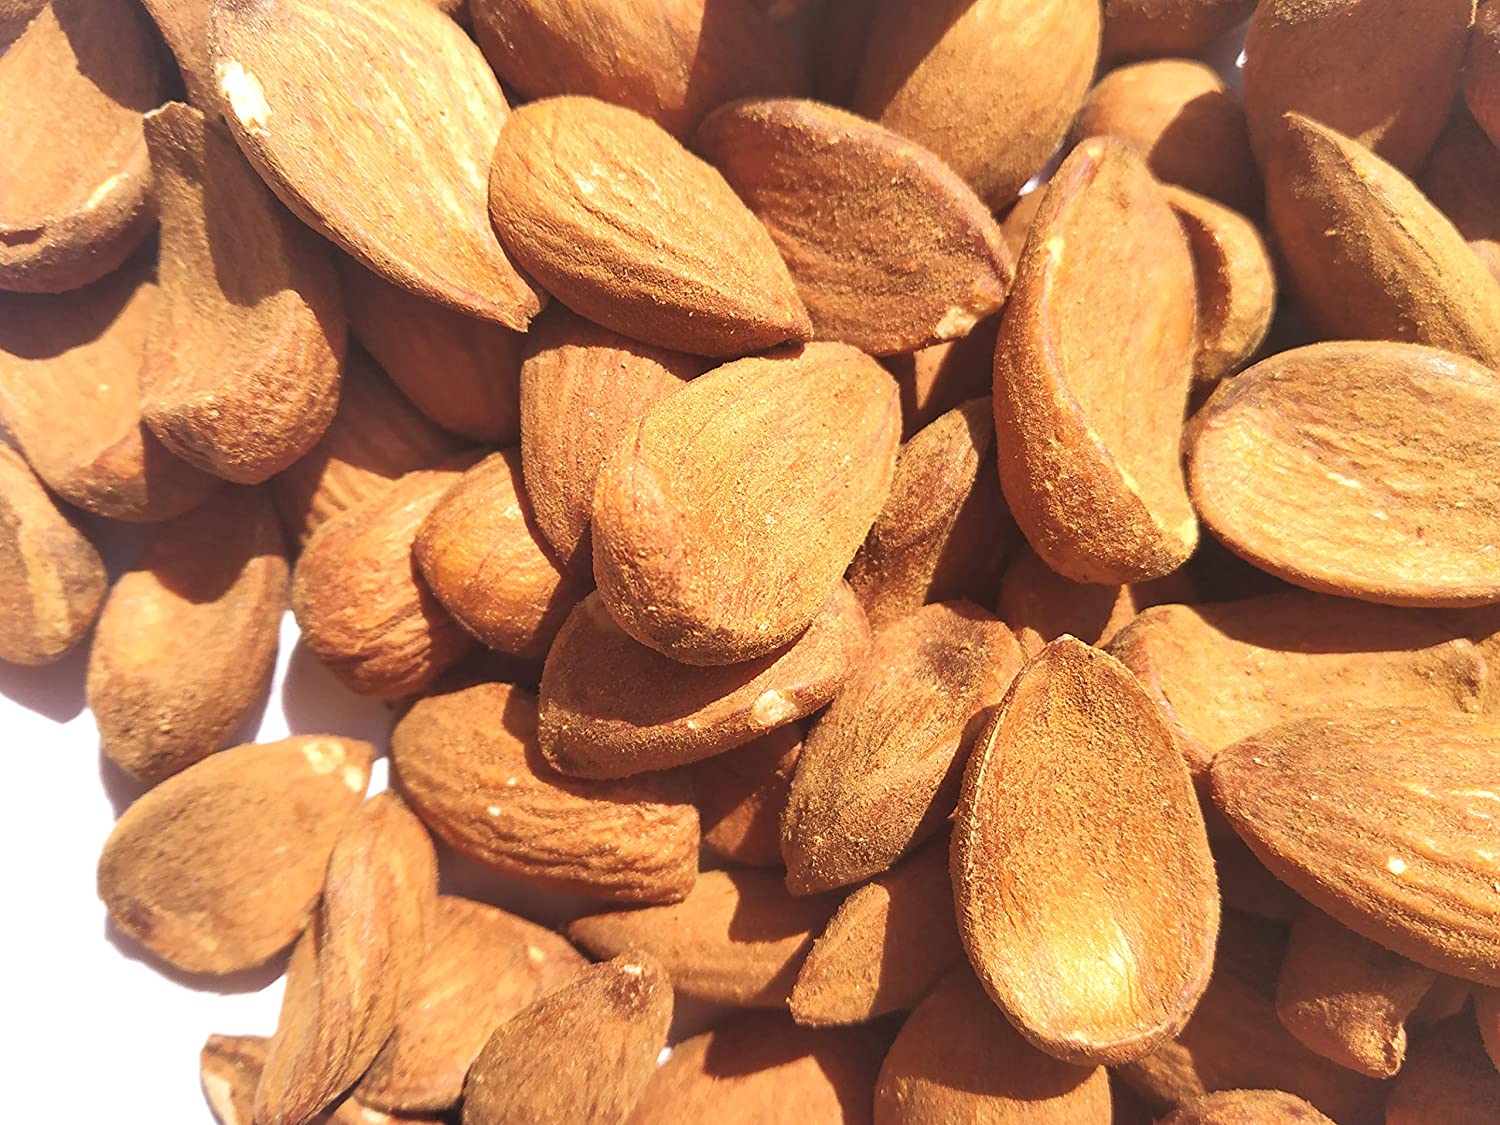 Supply and Distribution of Iranian Mamra Almond Kernels in India